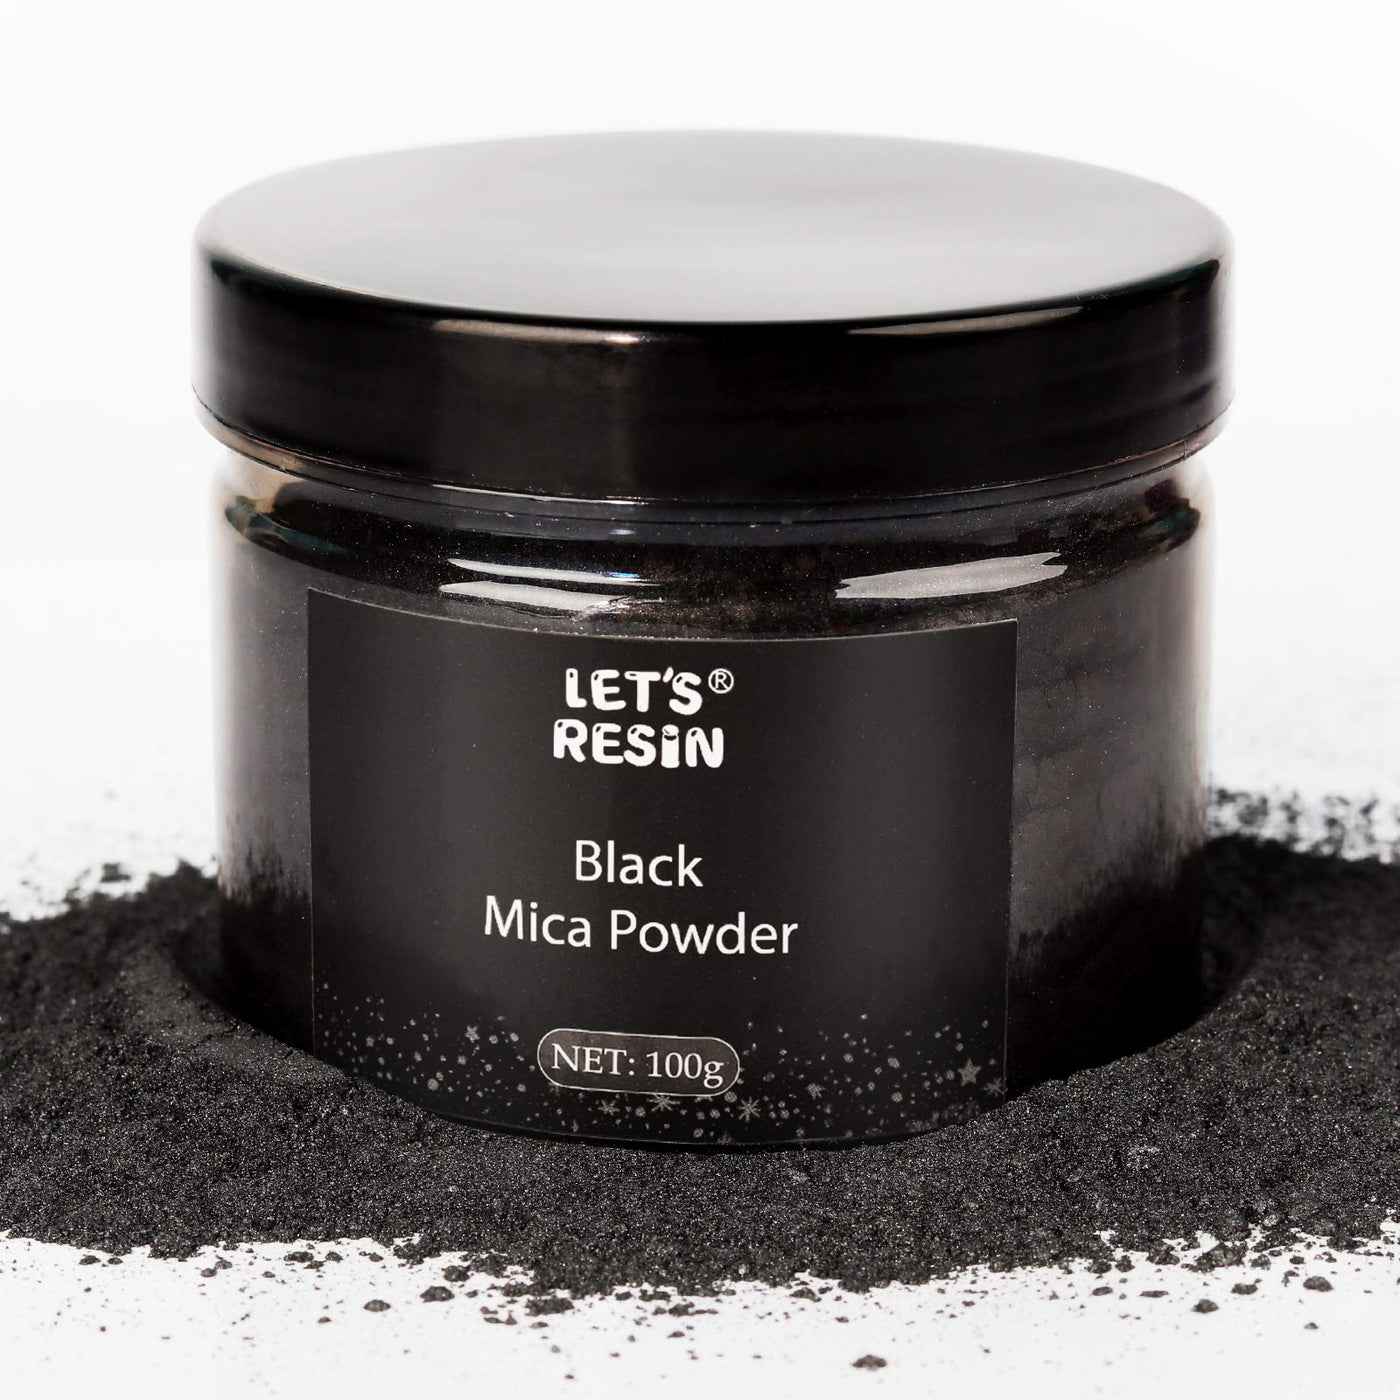 LET'S RESIN Black Mica Pigment Powder, 3.5 Ounces/ 100 Grams Black Mica  Powder for Soap Making, Shimmer Resin Pigment Powder for Epoxy, Slime, Bath  Bomb, DIY Crafting Projects